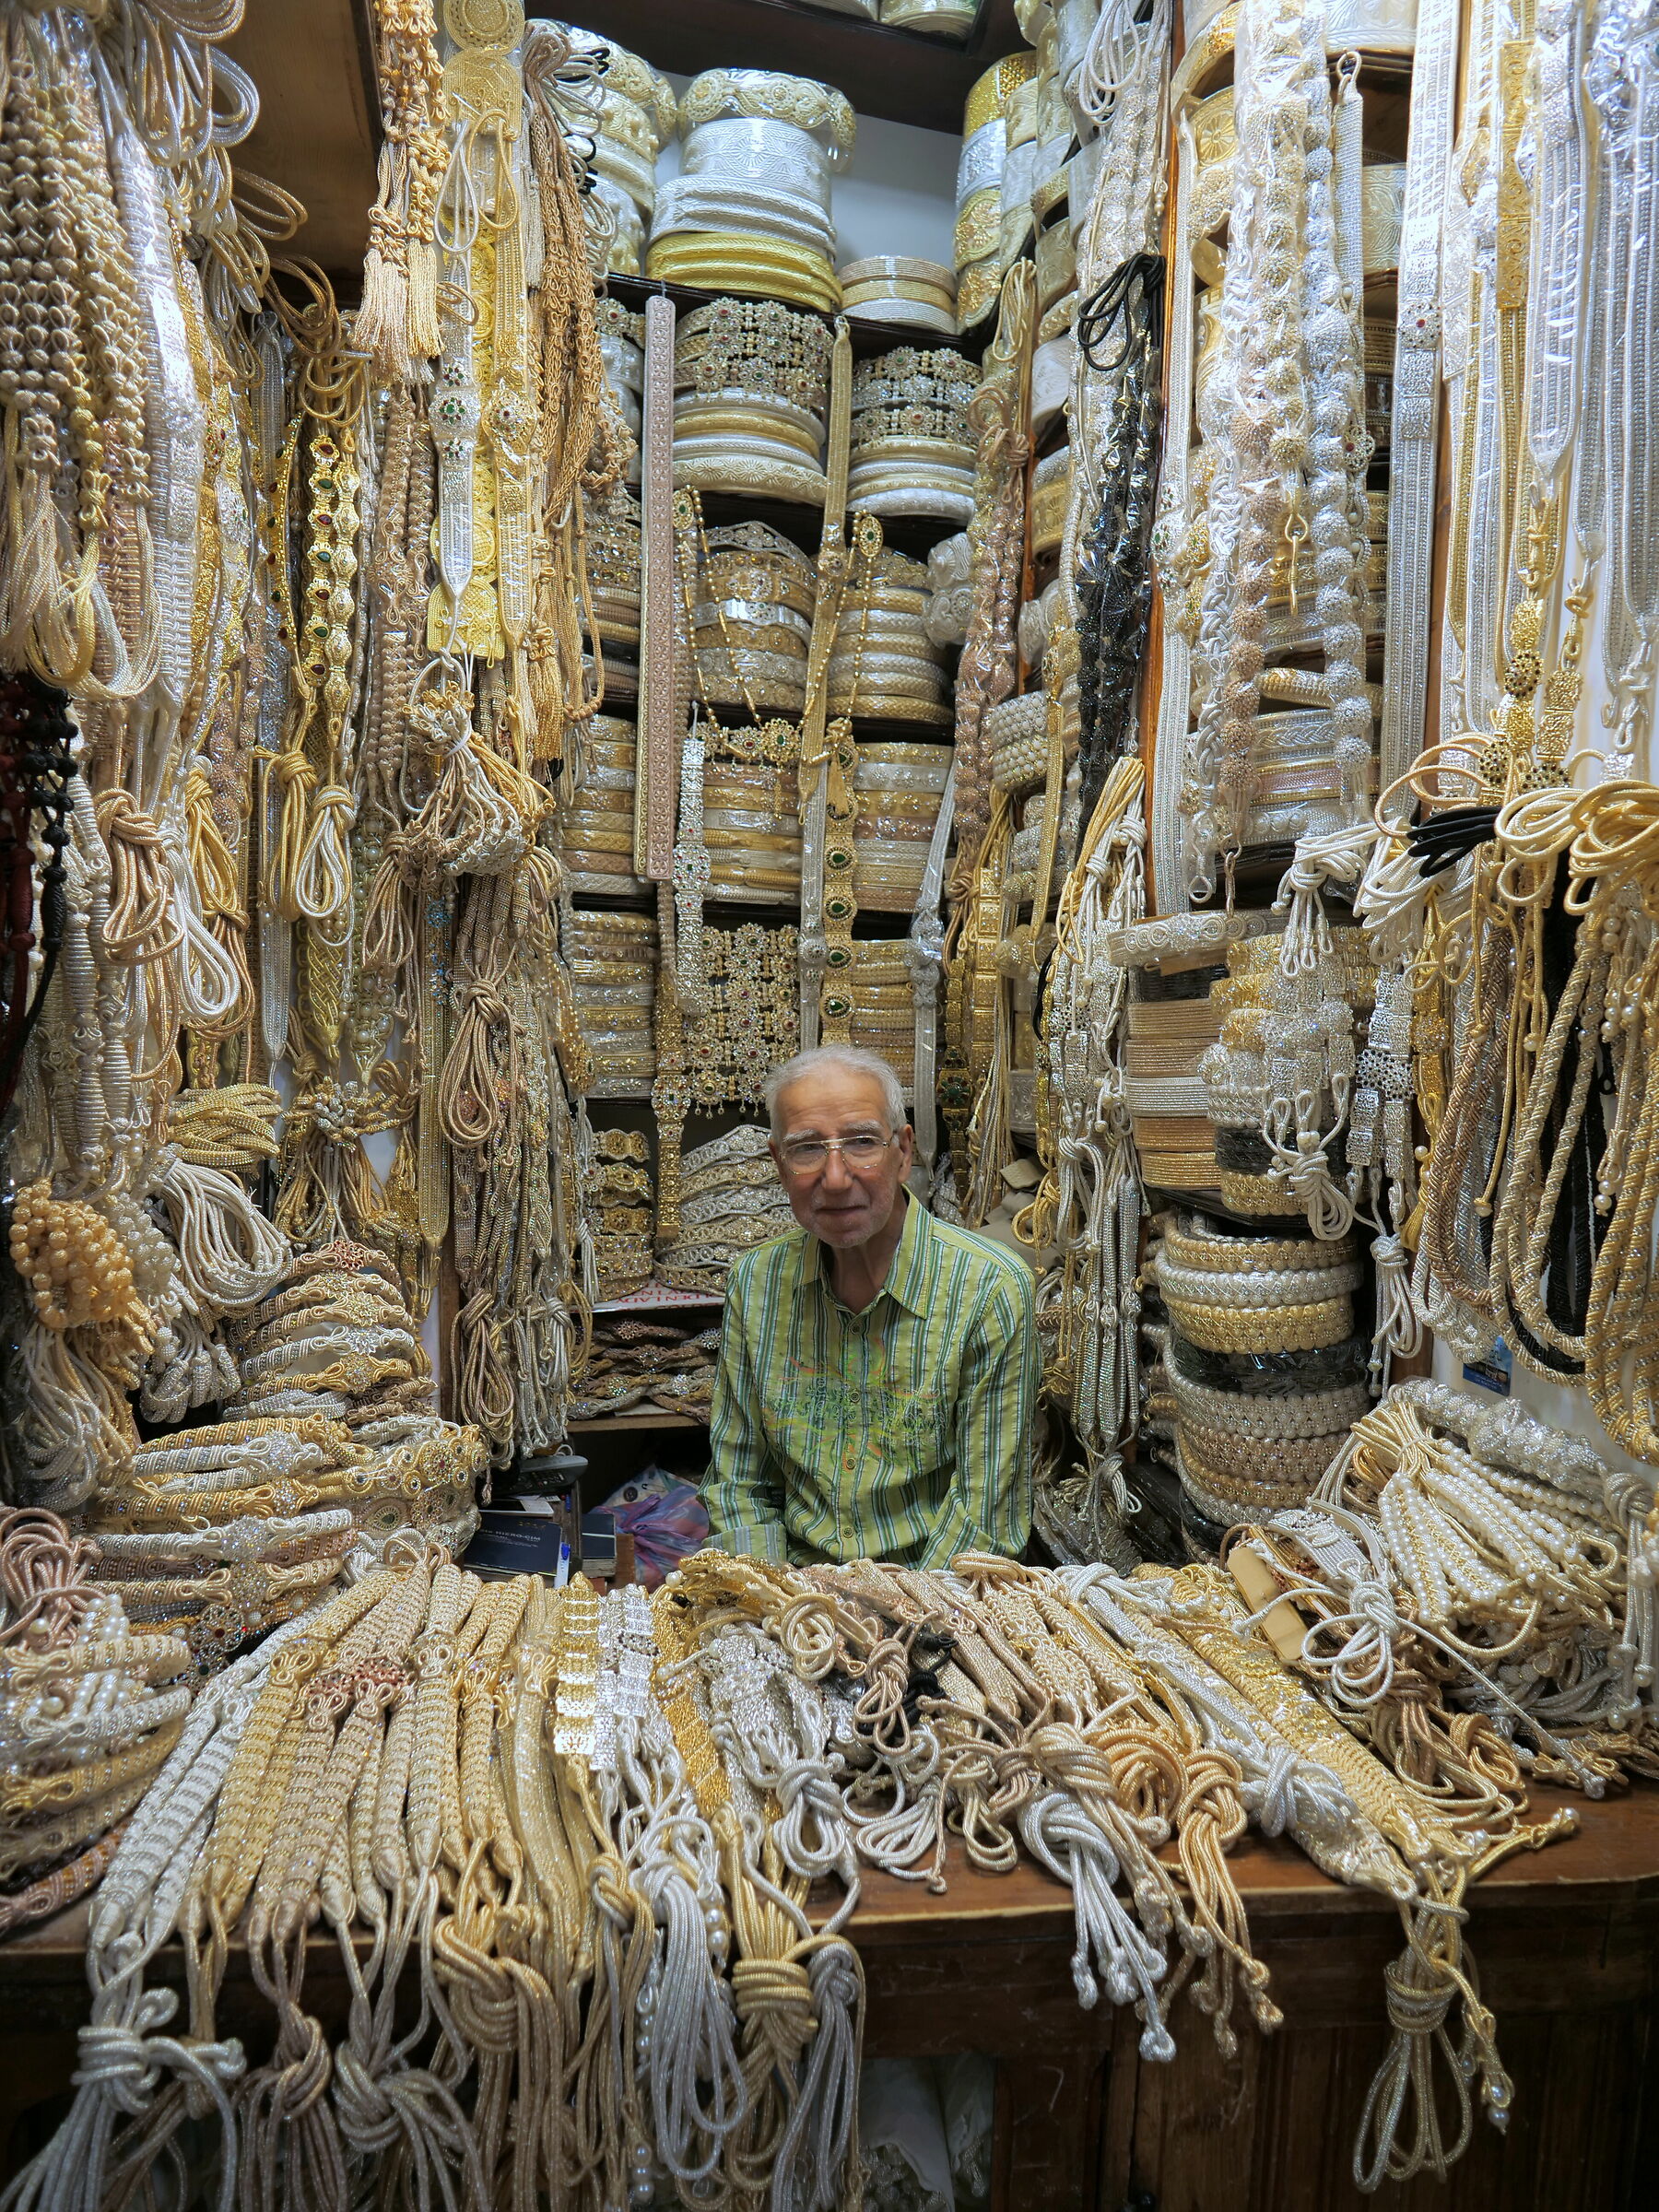 The seller of ornamental ropes...